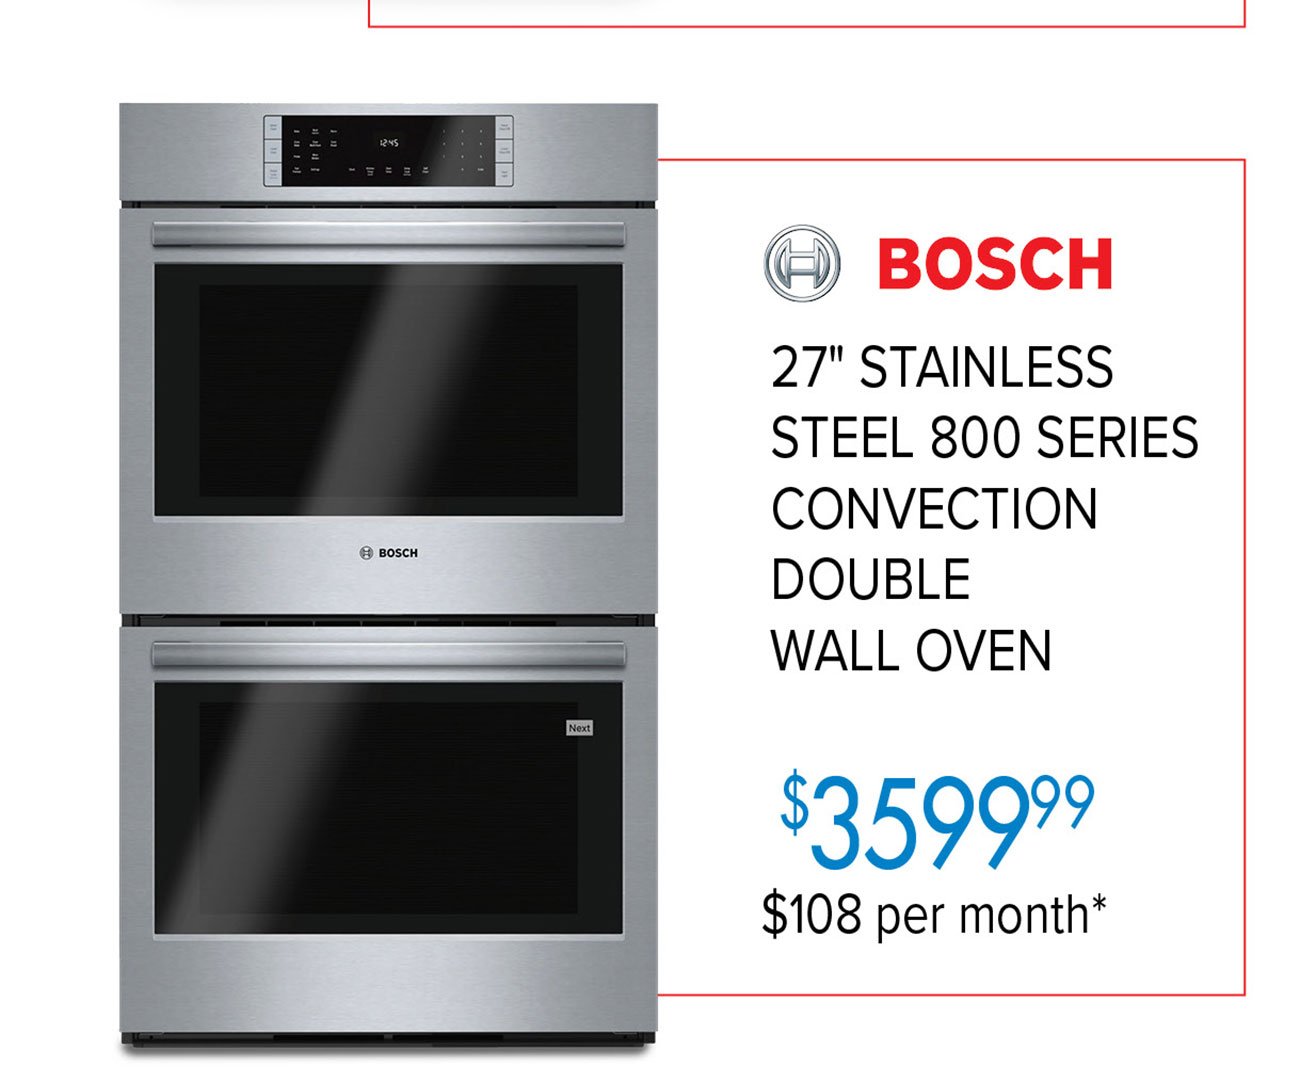  BOSCH 27" STAINLESS STEEL 800 SERIES CONVECTION DOUBLE WALL OVEN 3599% $108 per month* 